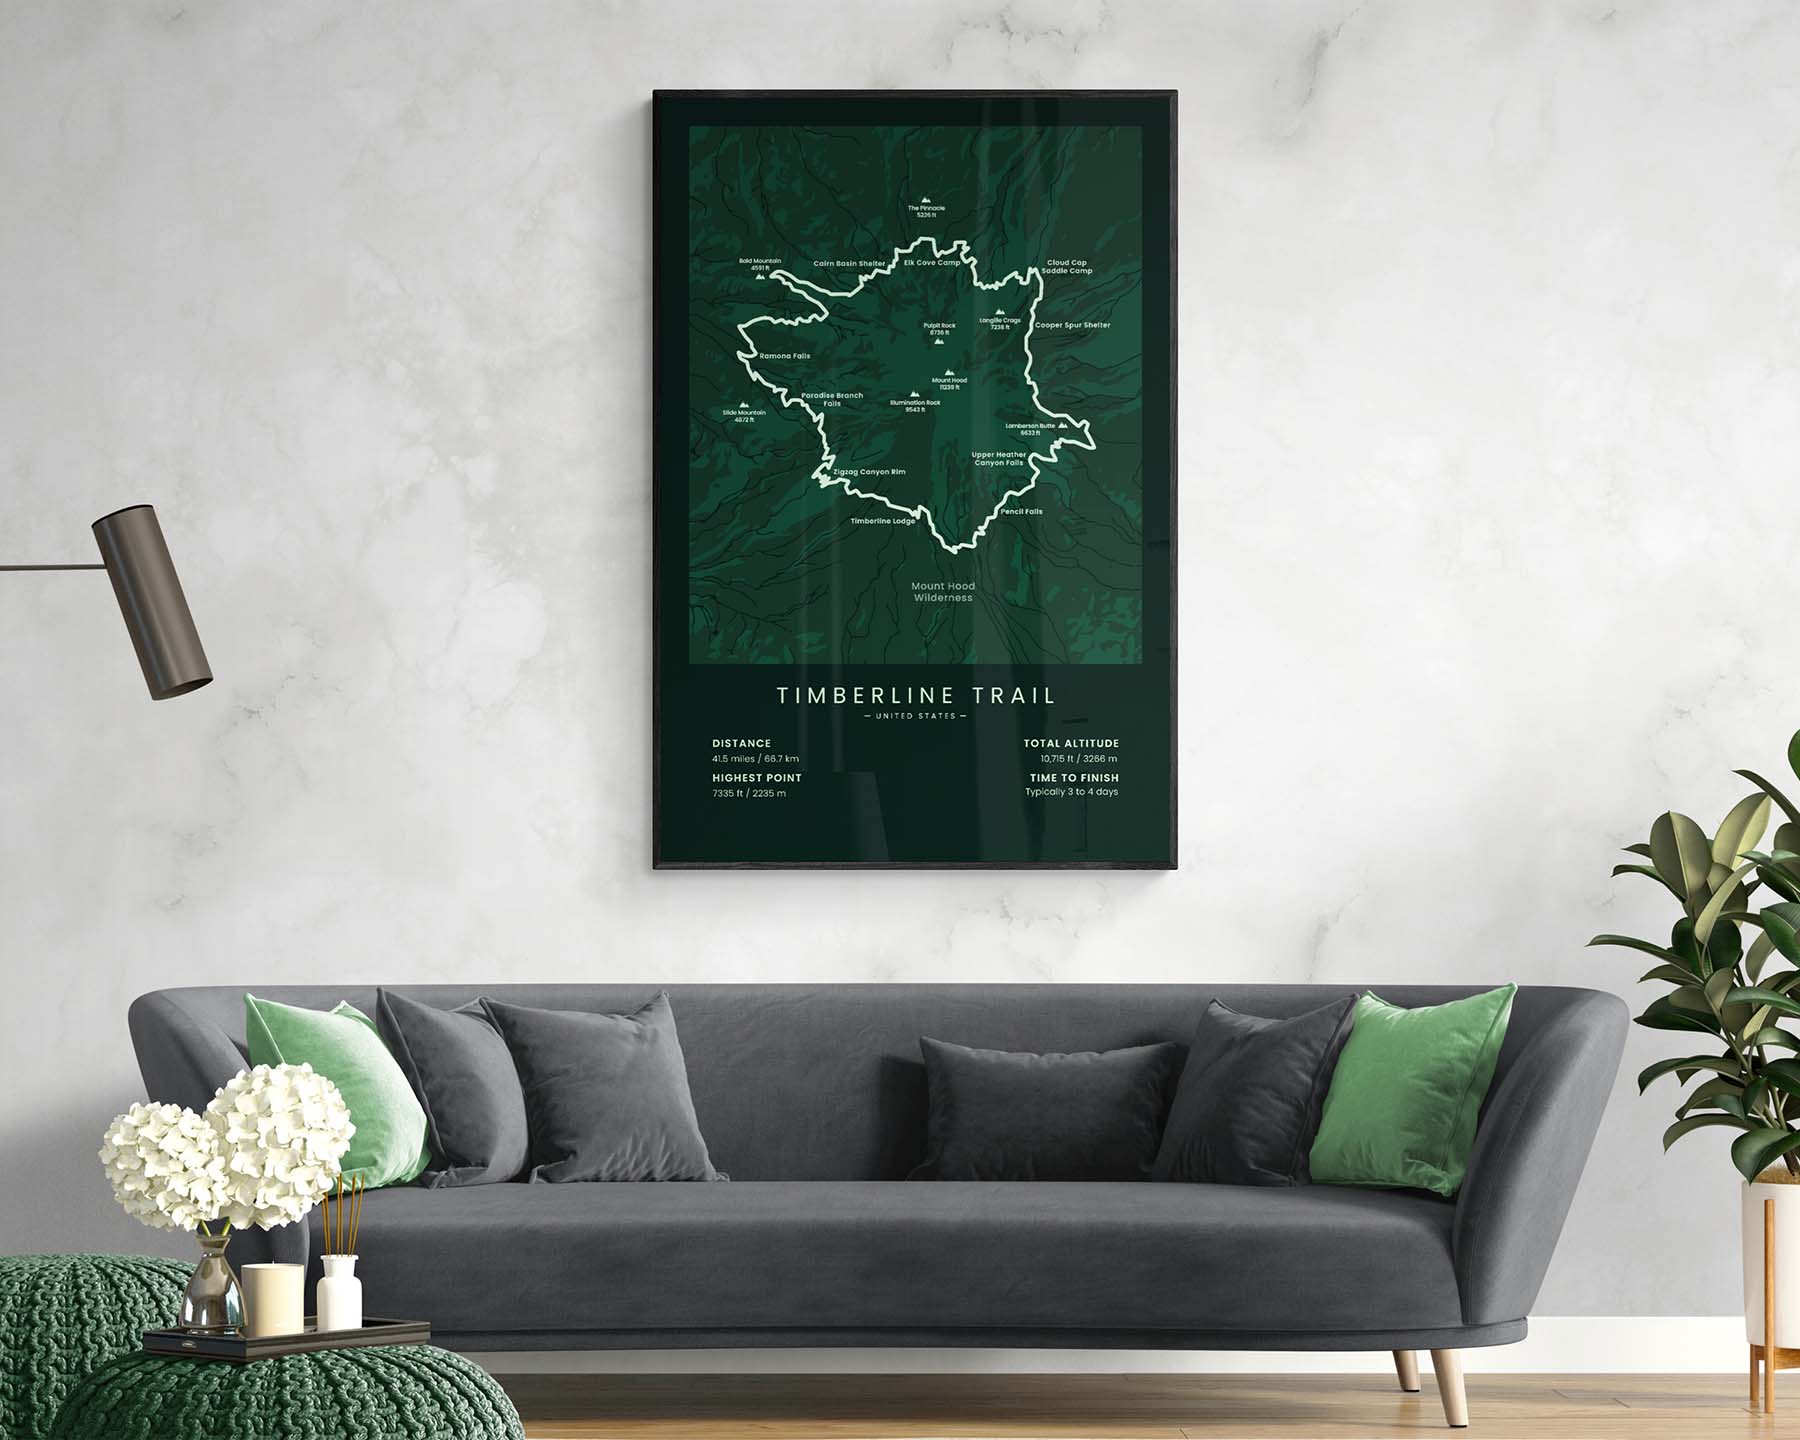 Timberline Trail (Mount Hood Loop, in Oregon, United States) minimalist map poster with black frame and green background living room mockup